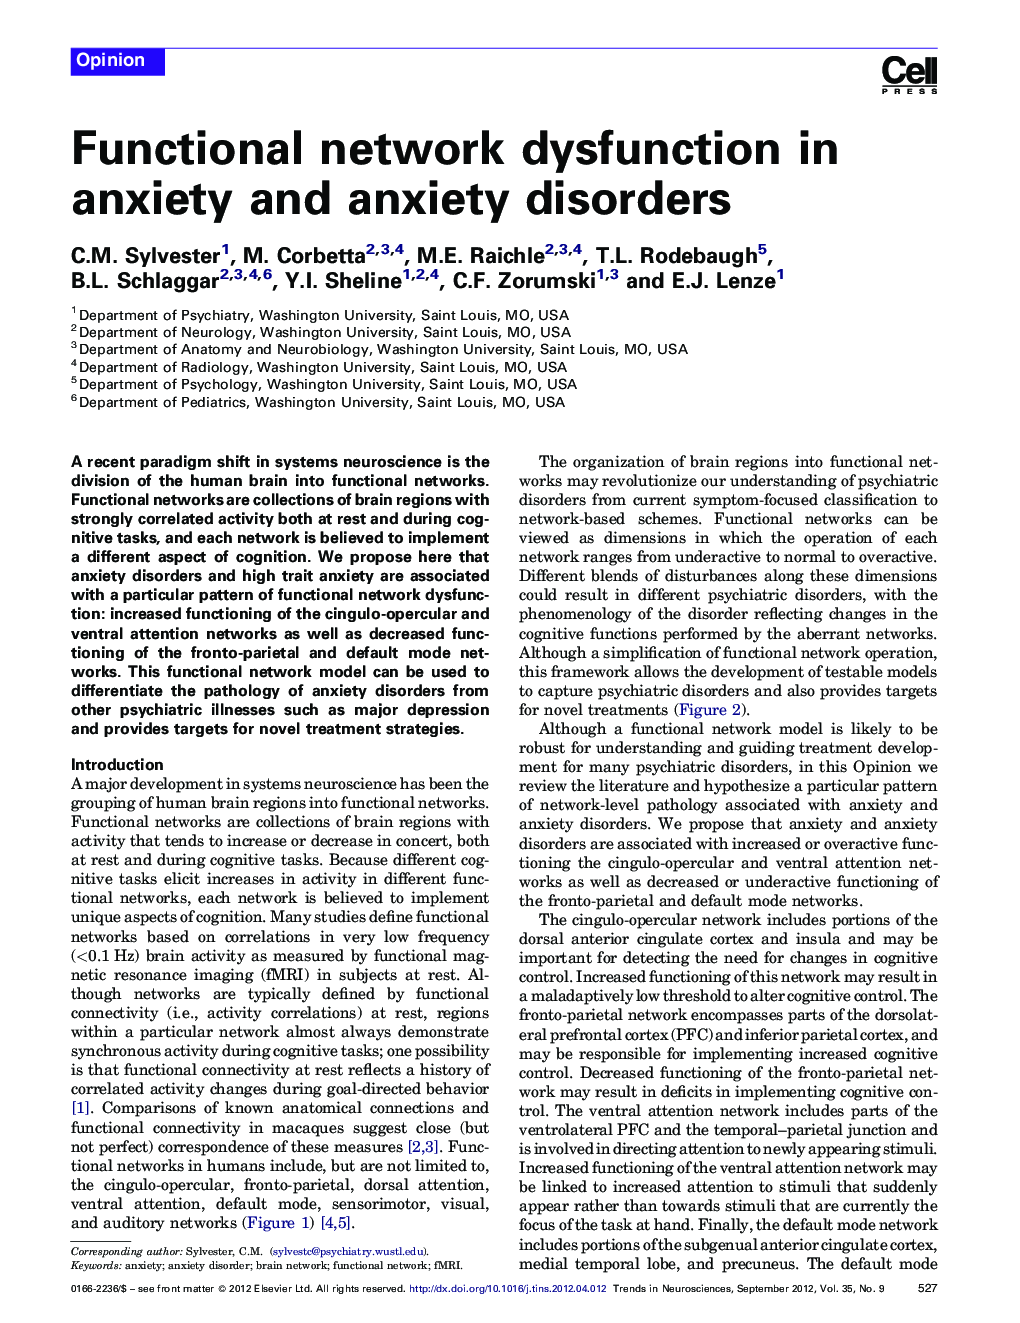 Functional network dysfunction in anxiety and anxiety disorders